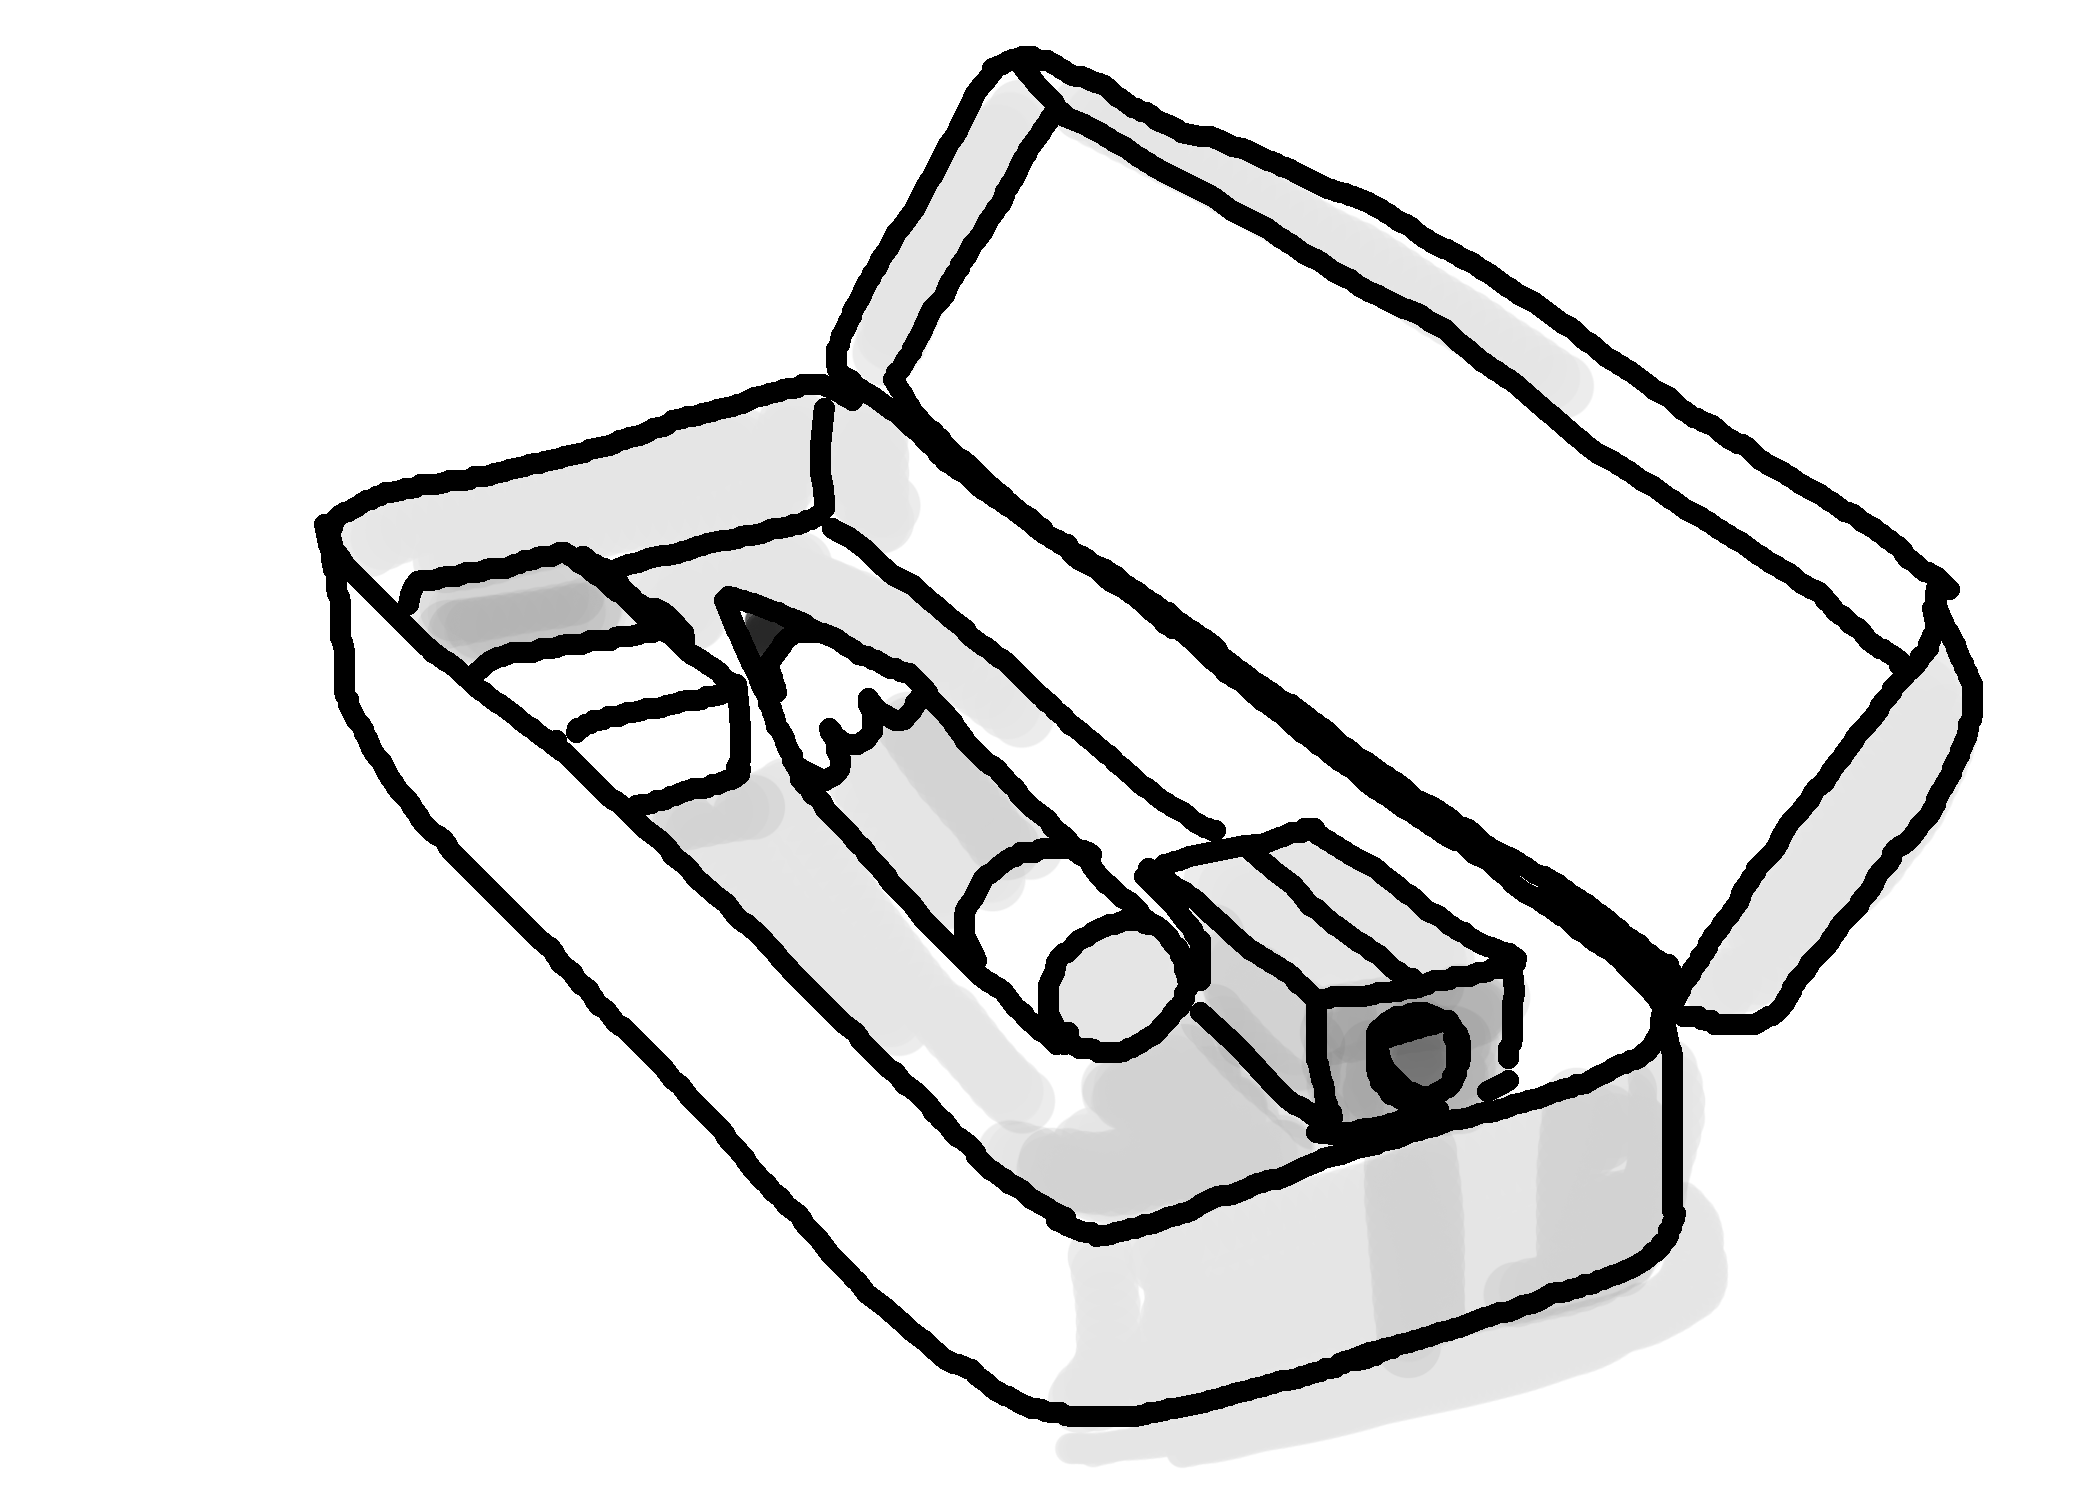 898 Simple Pencil Case Coloring Pages for Kindergarten